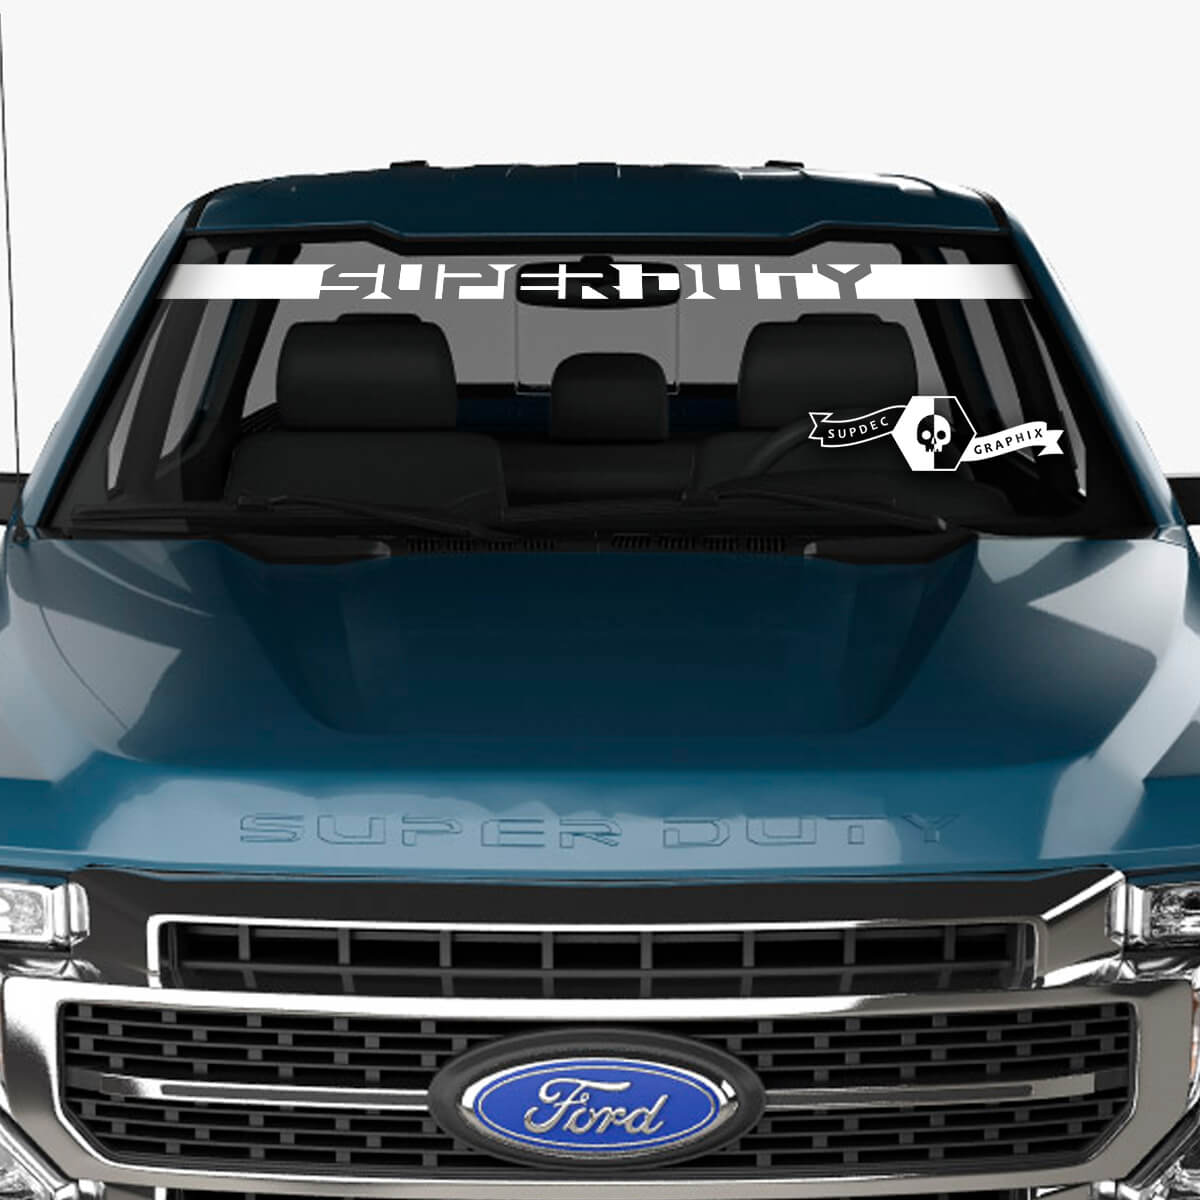 Destroyed Ranger Logo Sticker with Claws for Ford Ranger side